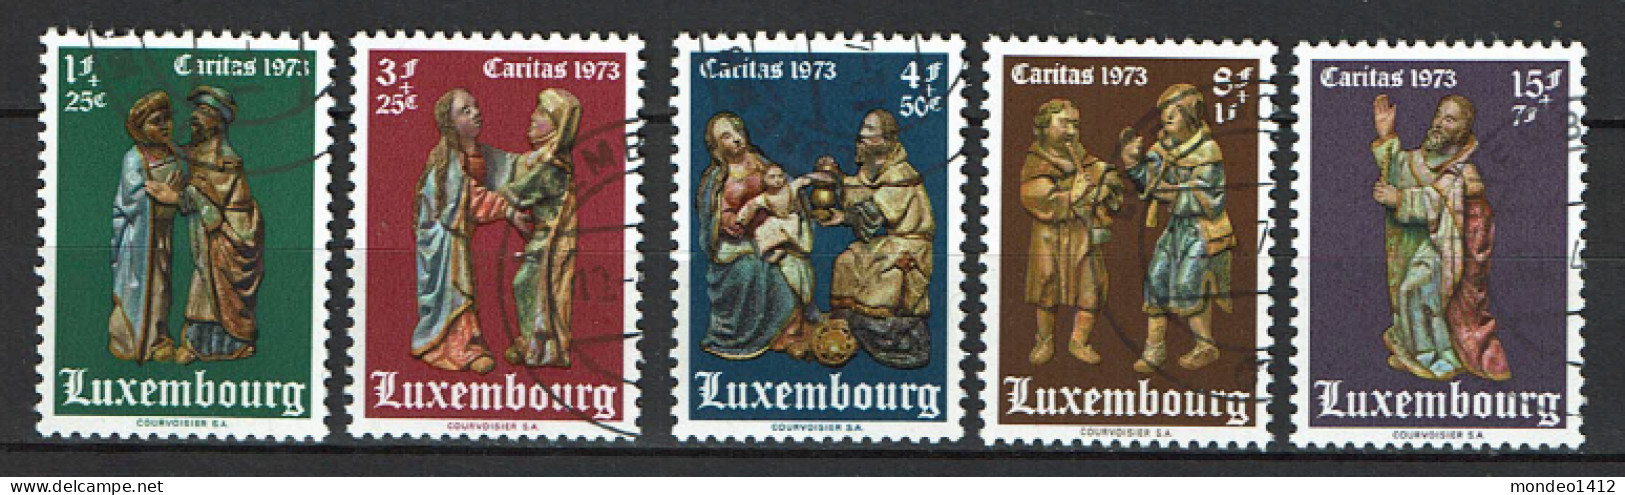 Luxembourg 1973 - YT 821/825 - Religious Statuettes - Charity Issue - Usati